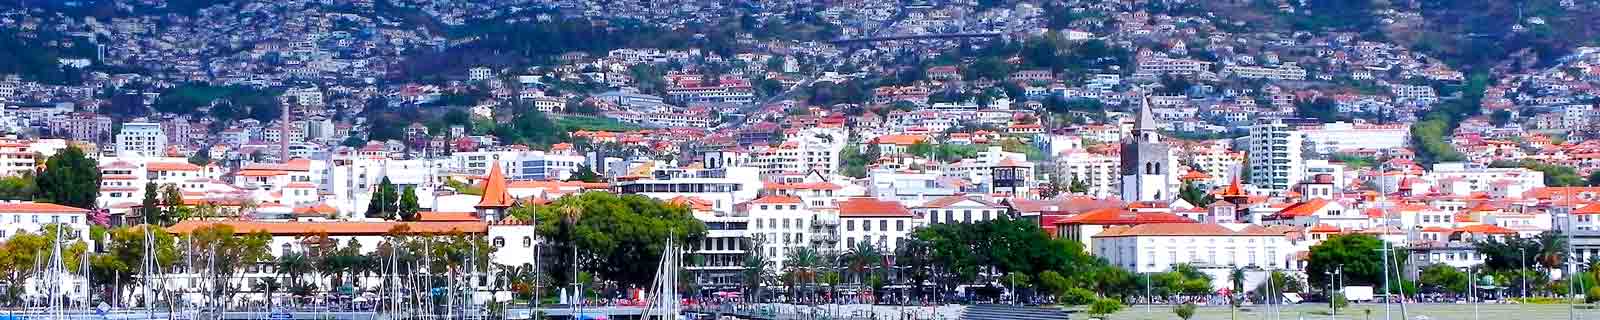 Photo by IQCruising of NAME at Funchal, Madeira, cruise port